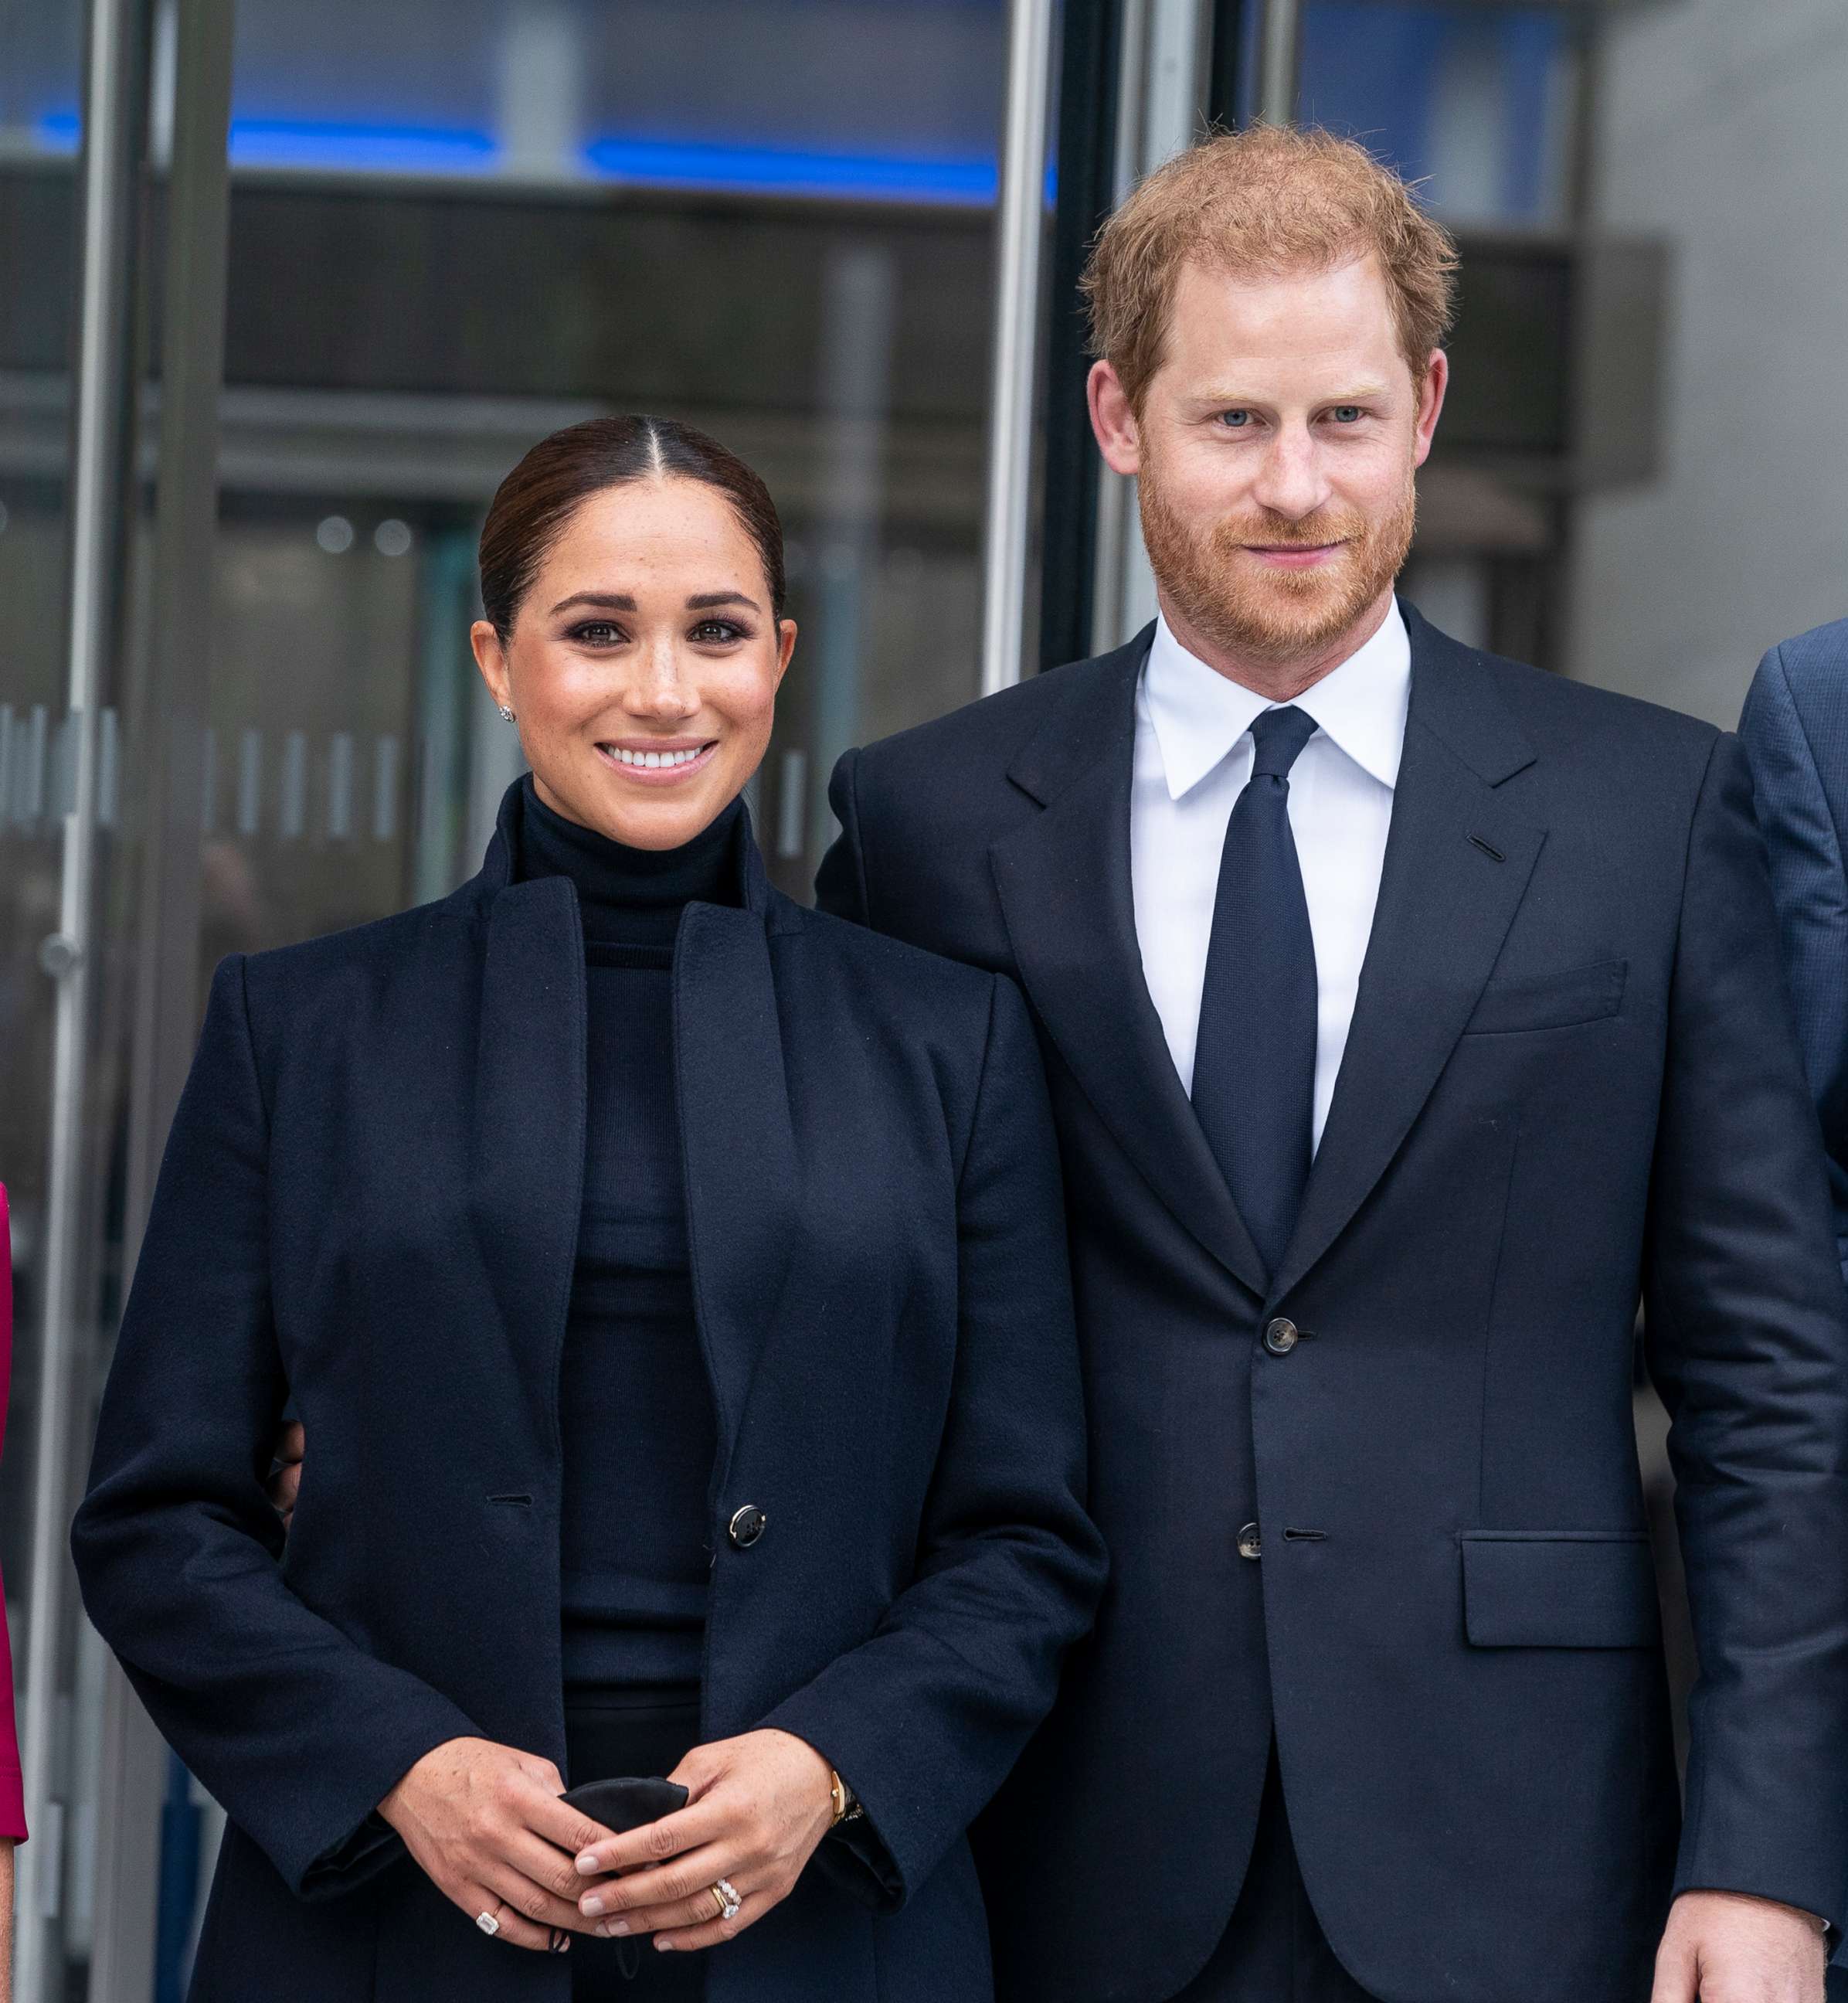 PHOTO: The Duke and Duchess of Sussex, Prince Harry and Meghan visit One World Observatory on 102nd floor of One World Trade Center in New York, Sept. 23, 2021.